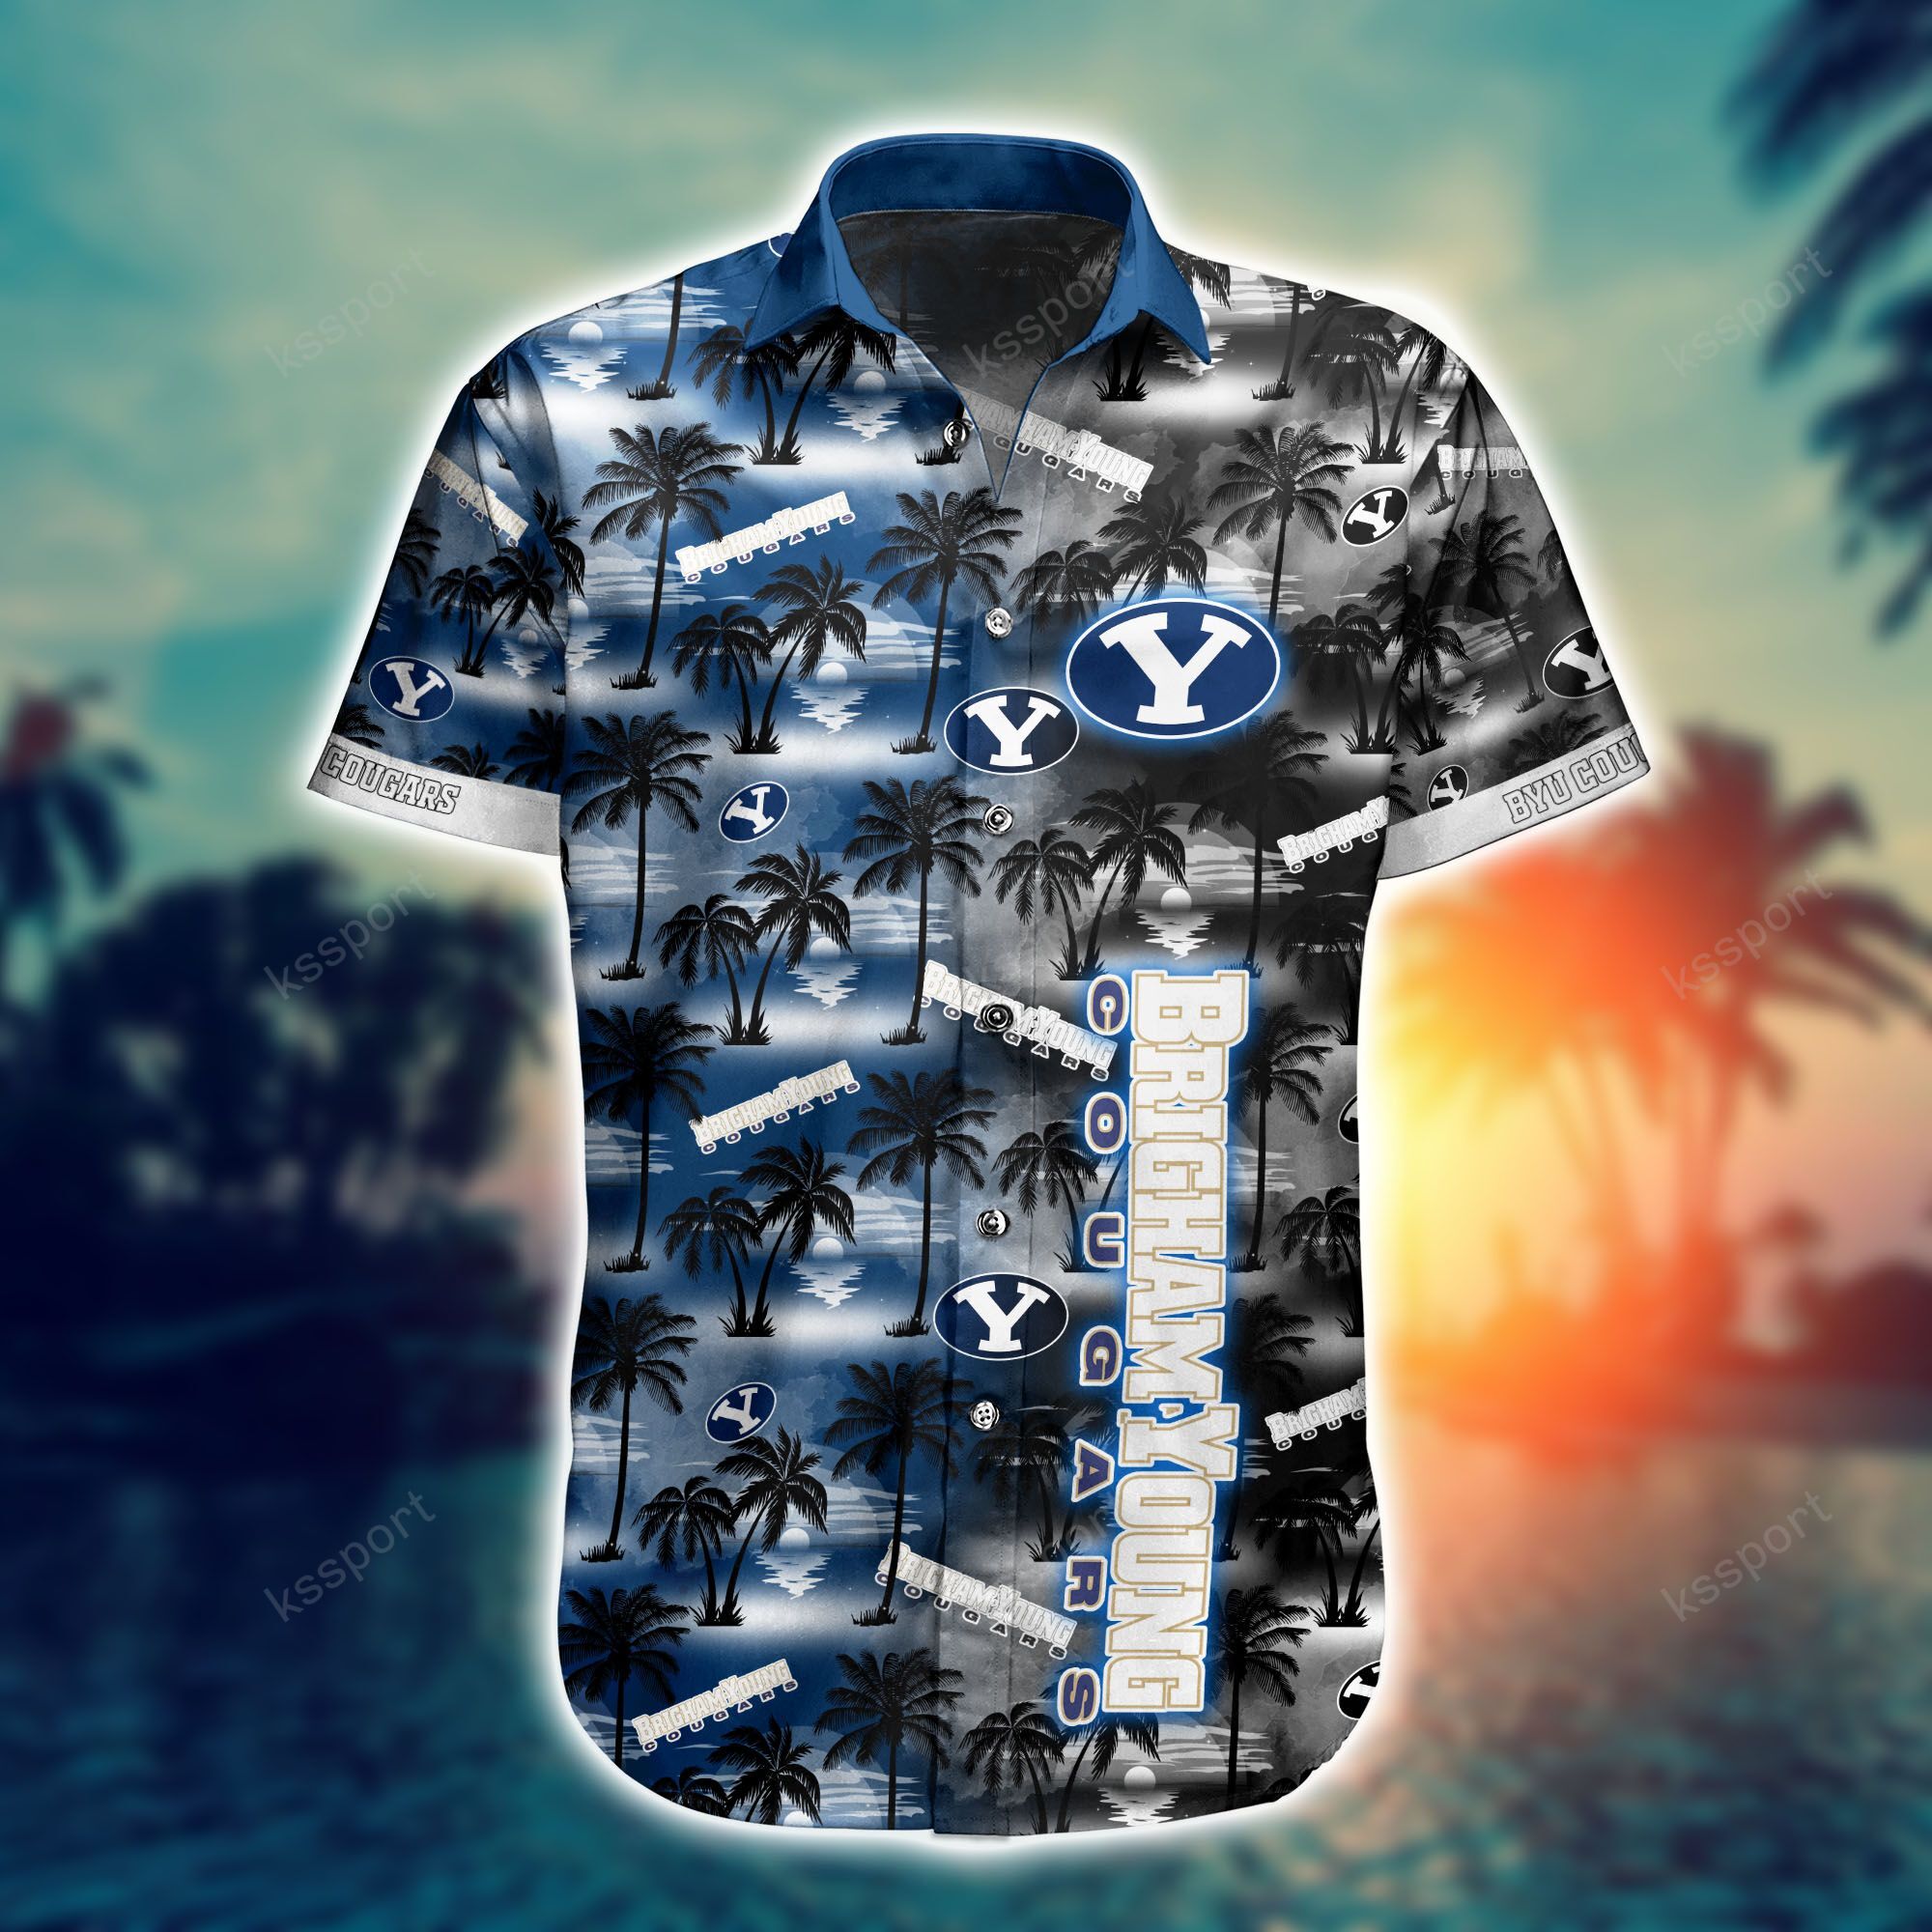 Top cool Hawaiian shirt 2022 - Make sure you get yours today before they run out! 126